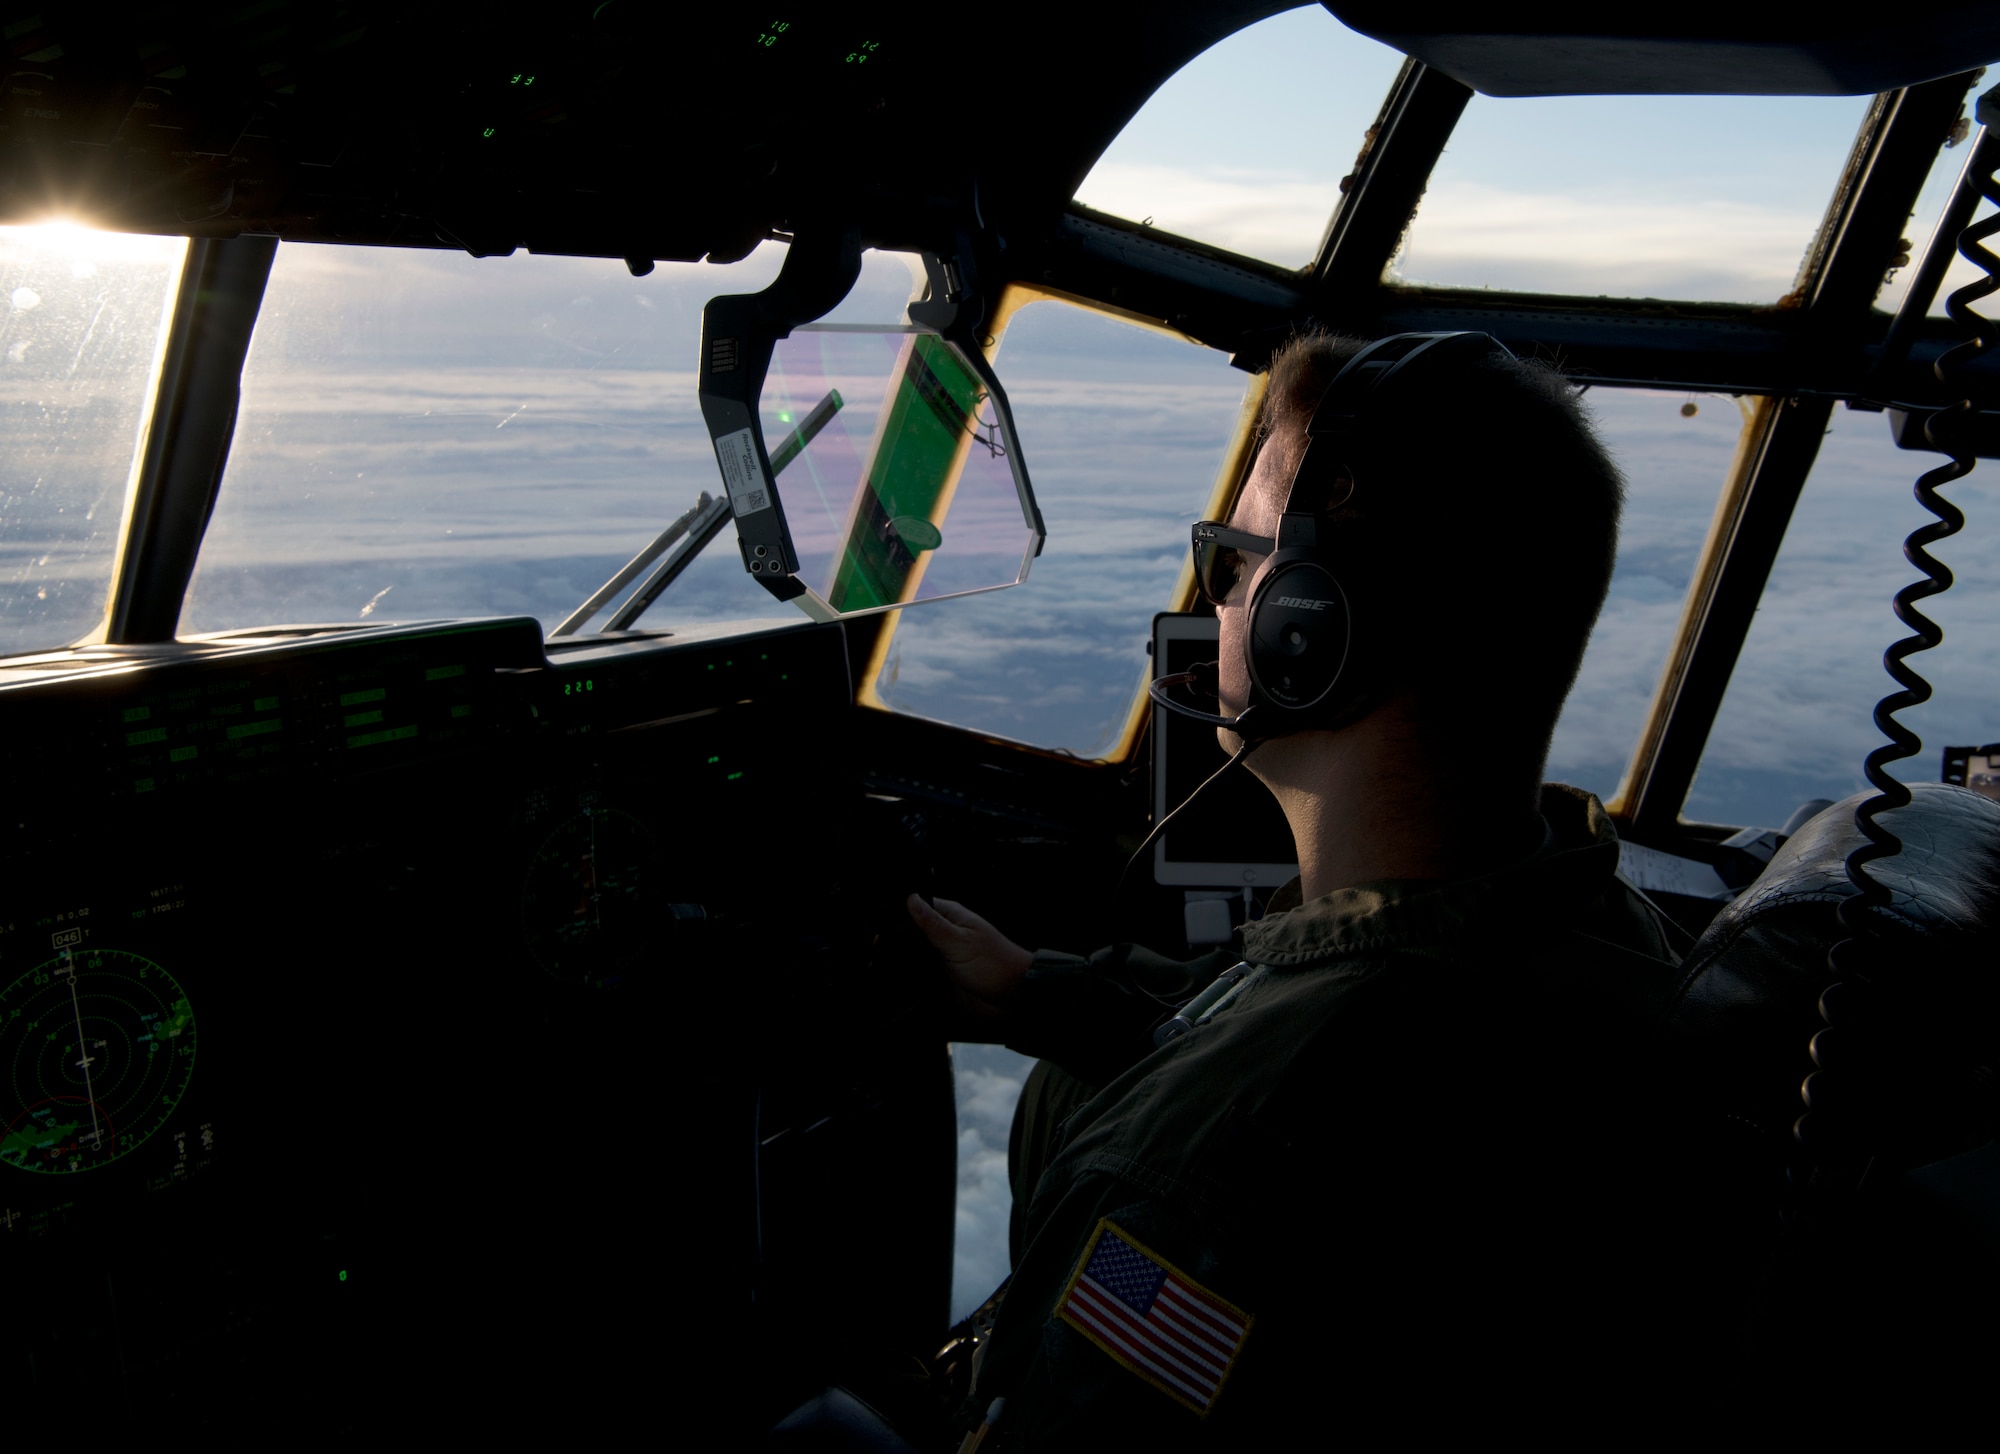 Capt. Patrick Tift, pilot for the 53rd Weather Reconnaissance Squadron at Keesler Air Force Base, Miss., flies the WC-130J Super Hercules aircraft into Hurricane Douglas from Barbers Point Kapolei Airport, Hawaii, July 26, 2020. The 53rd WRS is part of the Air Force Reserve 403rd Wing and is the only unit of its kind in the entire Department of Defense. (U.S. Air Force Photo by Senior Airman Kristen Pittman)